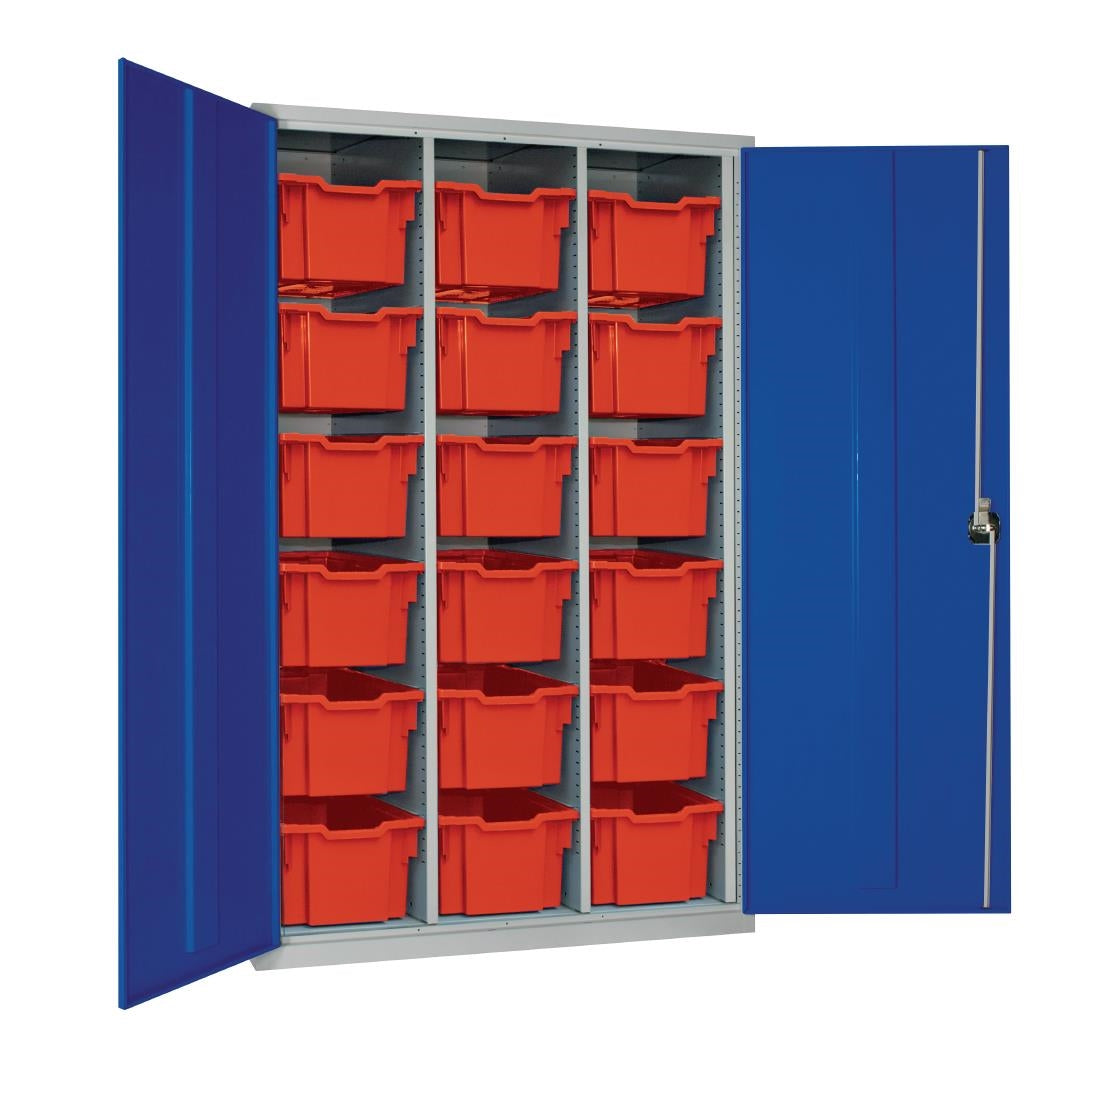 18 Tray High-Capacity Storage Cupboard - Blue with Red Trays